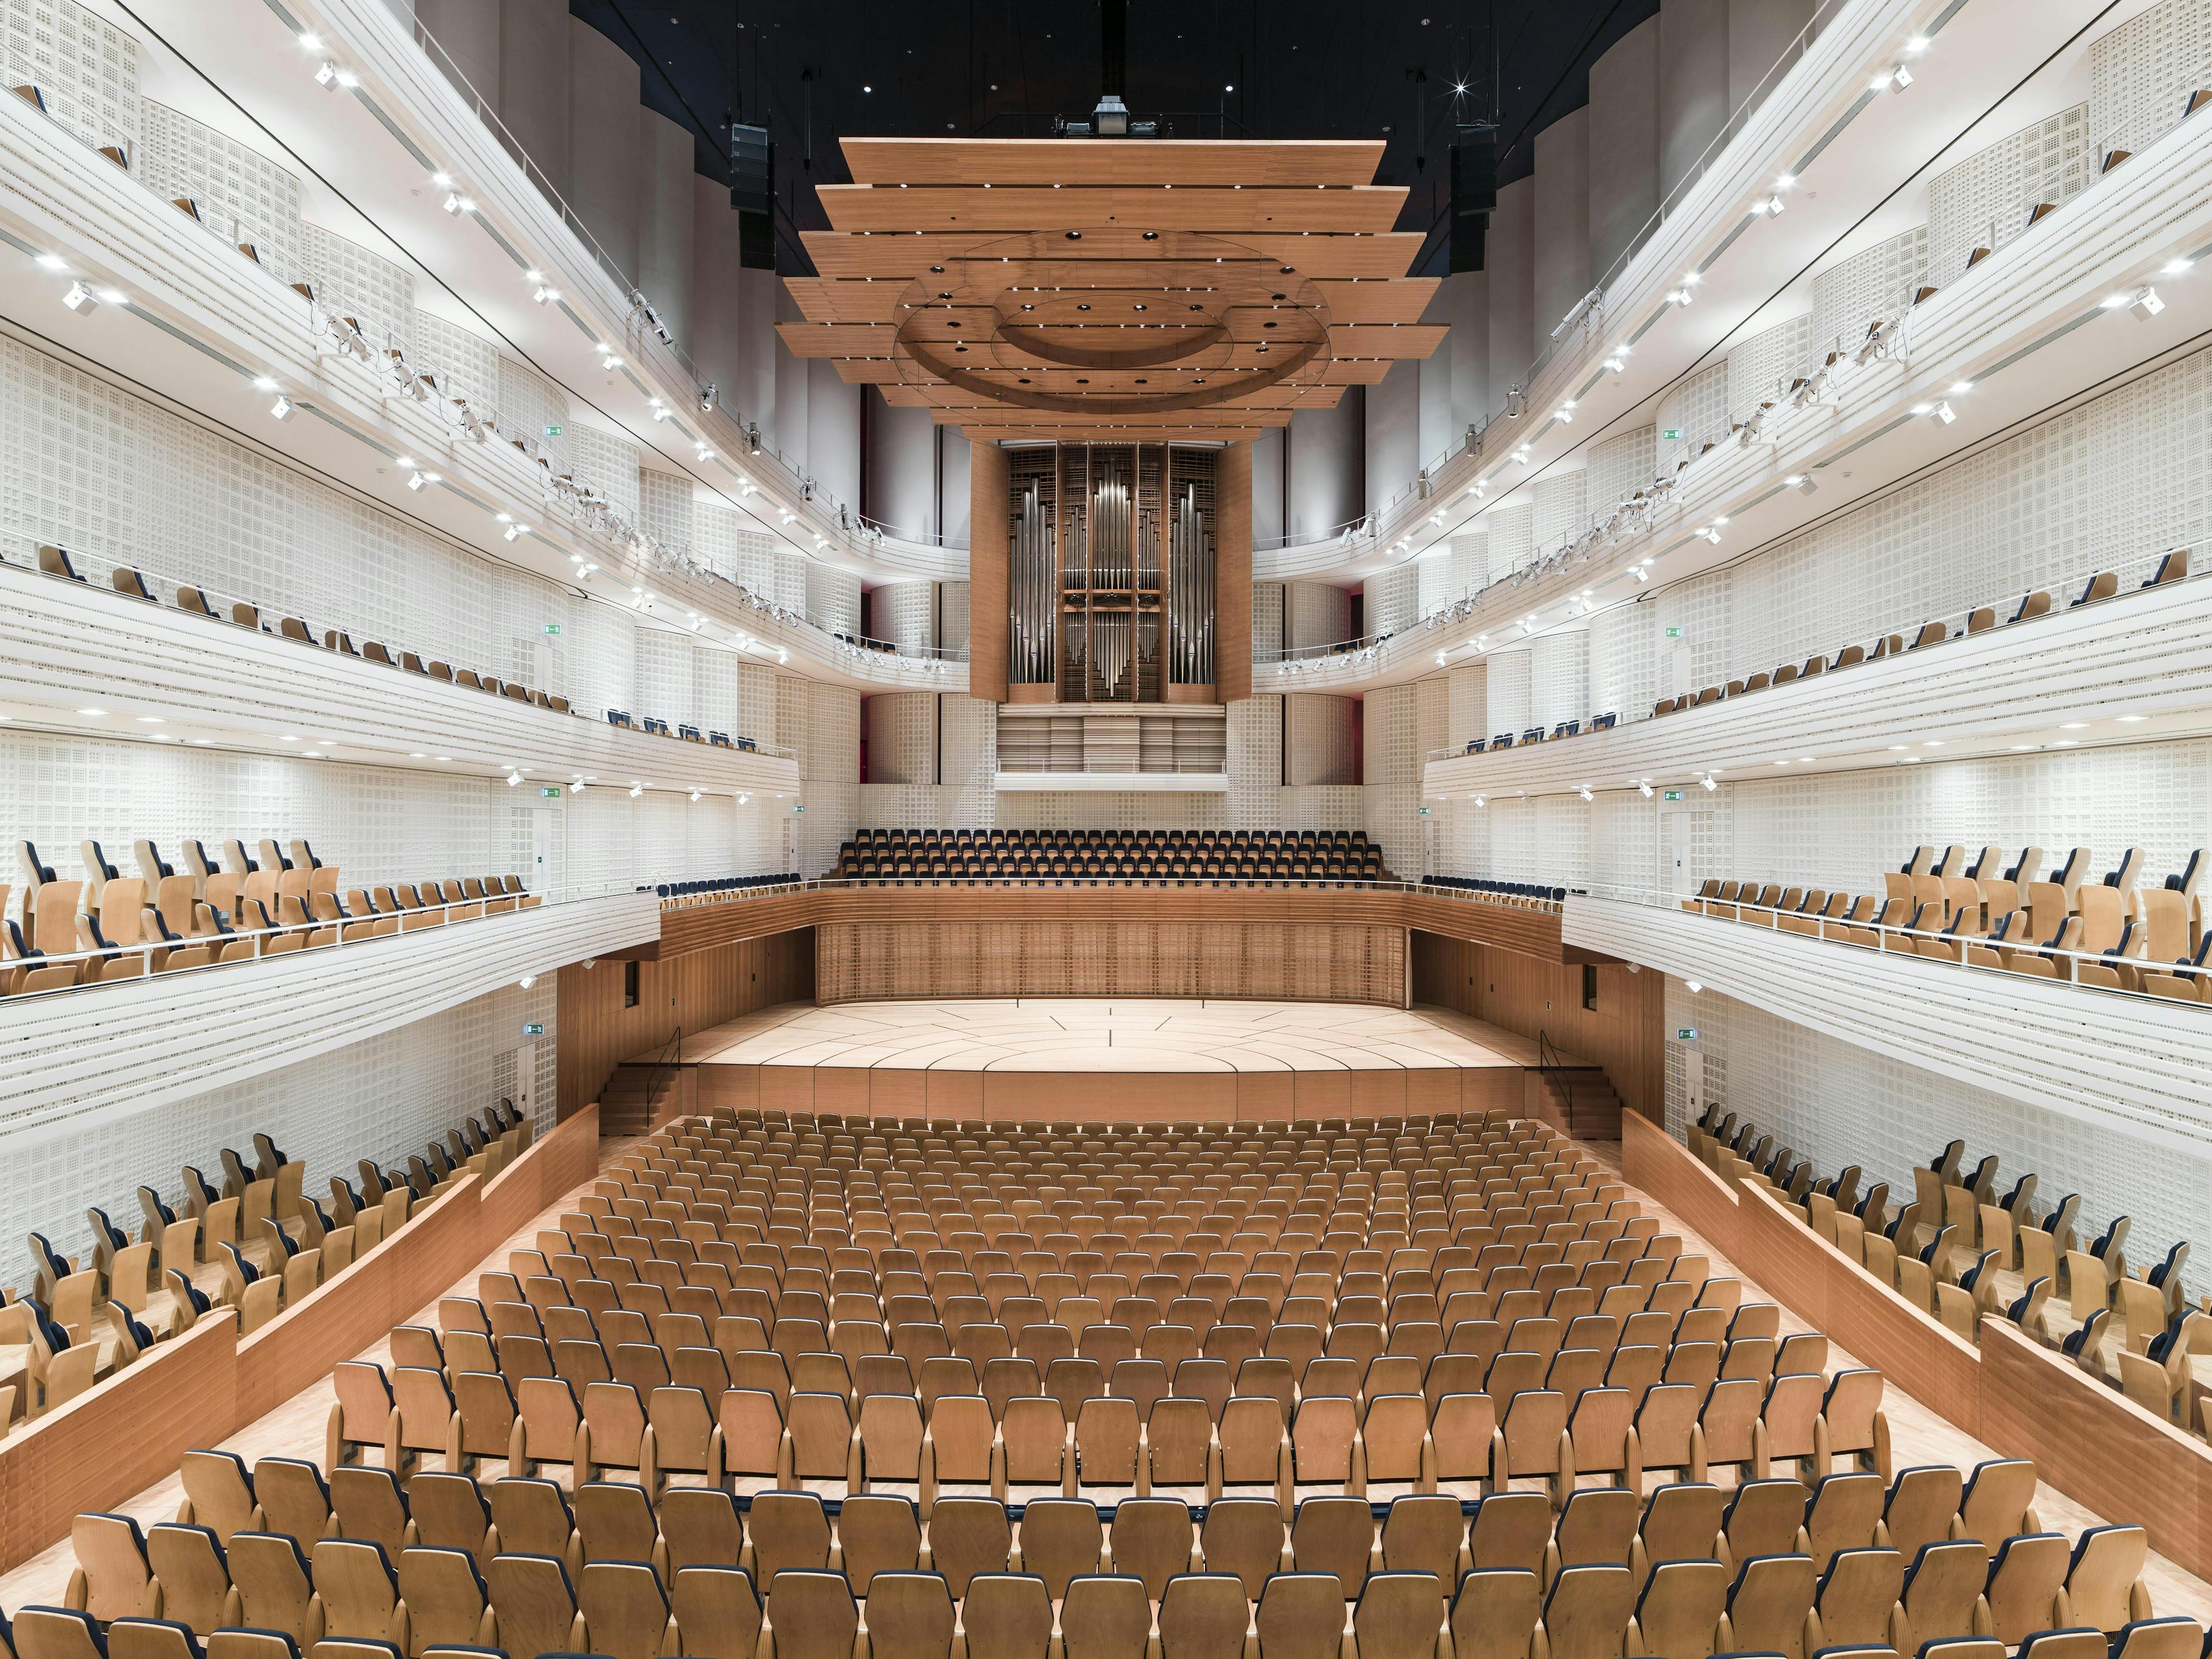 The Concert Hall in the KKL Luzern offers space for up to 1989 Guests